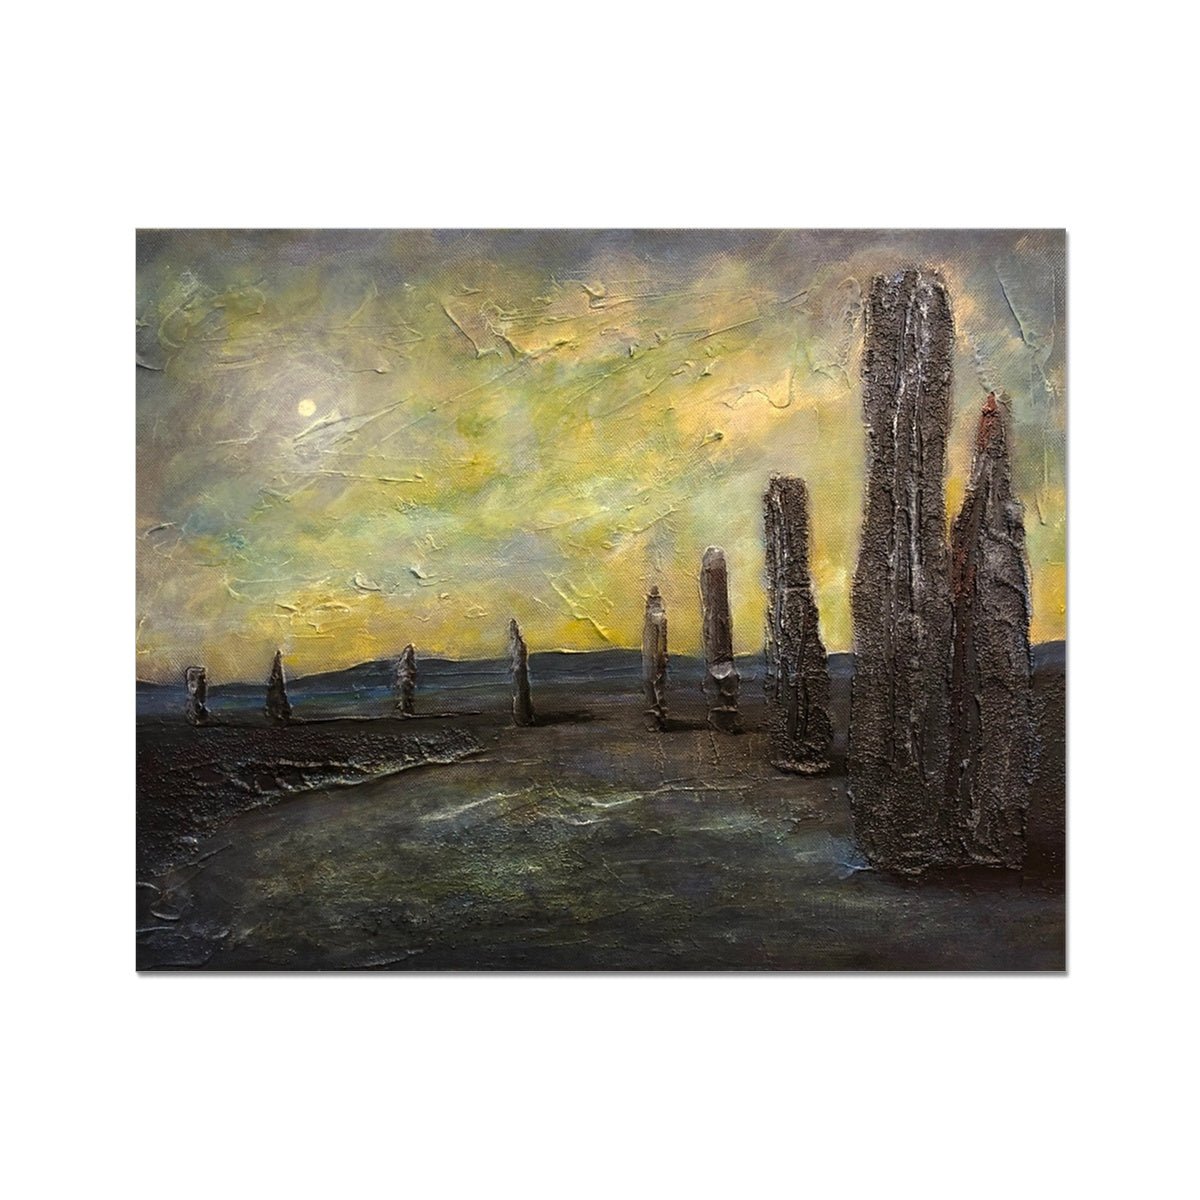 An Ethereal Ring Of Brodgar Orkney Painting | Artist Proof Collector Prints From Scotland-Artist Proof Collector Prints-Orkney Art Gallery-20"x16"-Paintings, Prints, Homeware, Art Gifts From Scotland By Scottish Artist Kevin Hunter